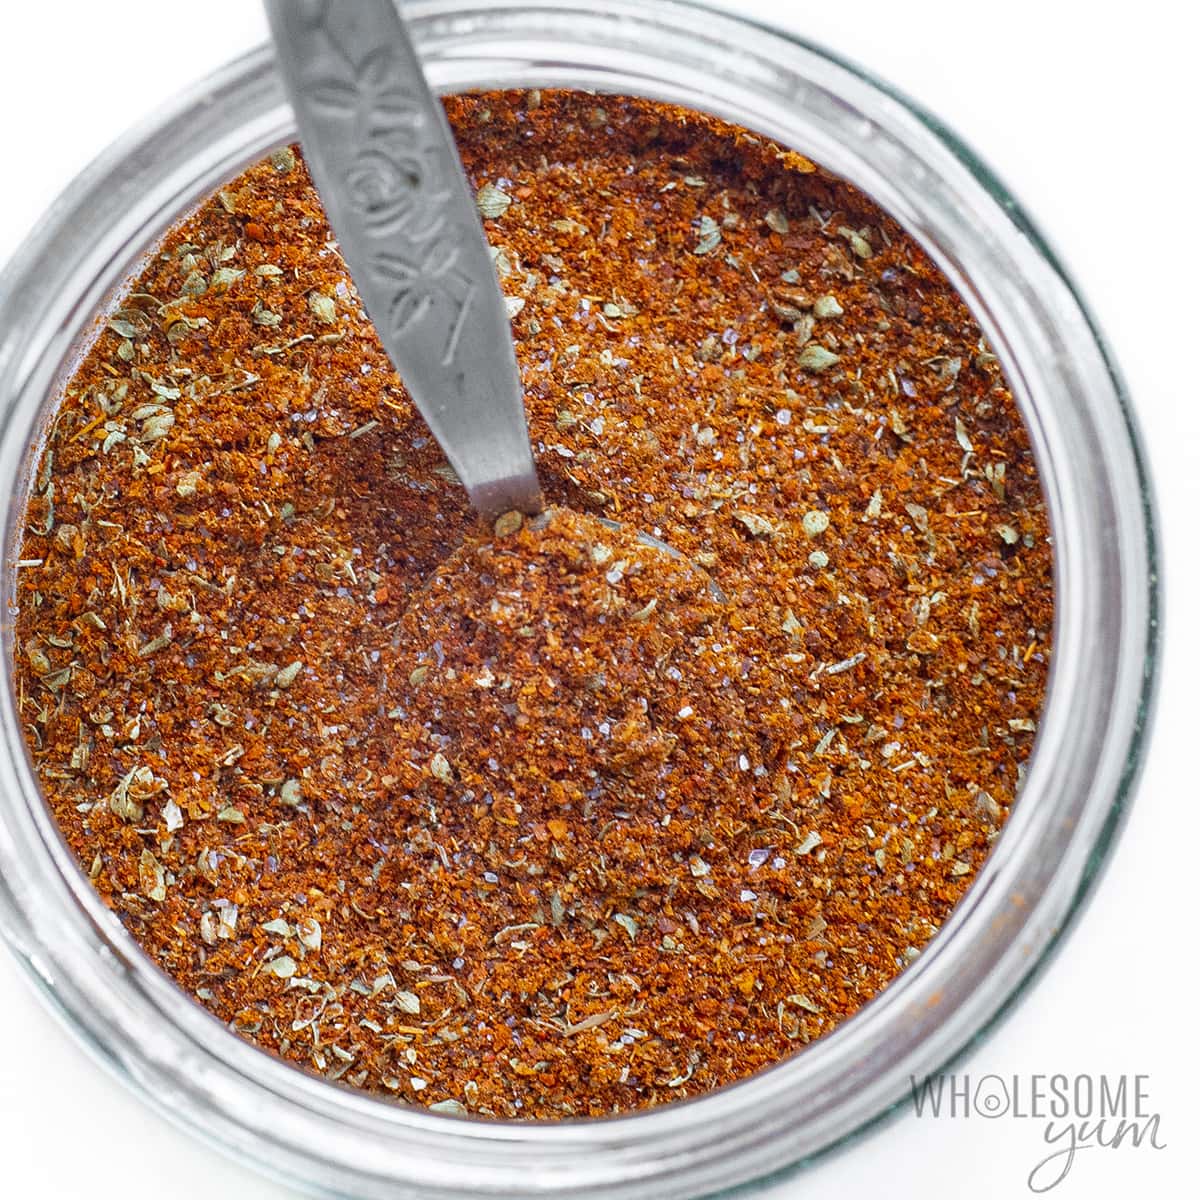 The spices are mixed in a bowl.